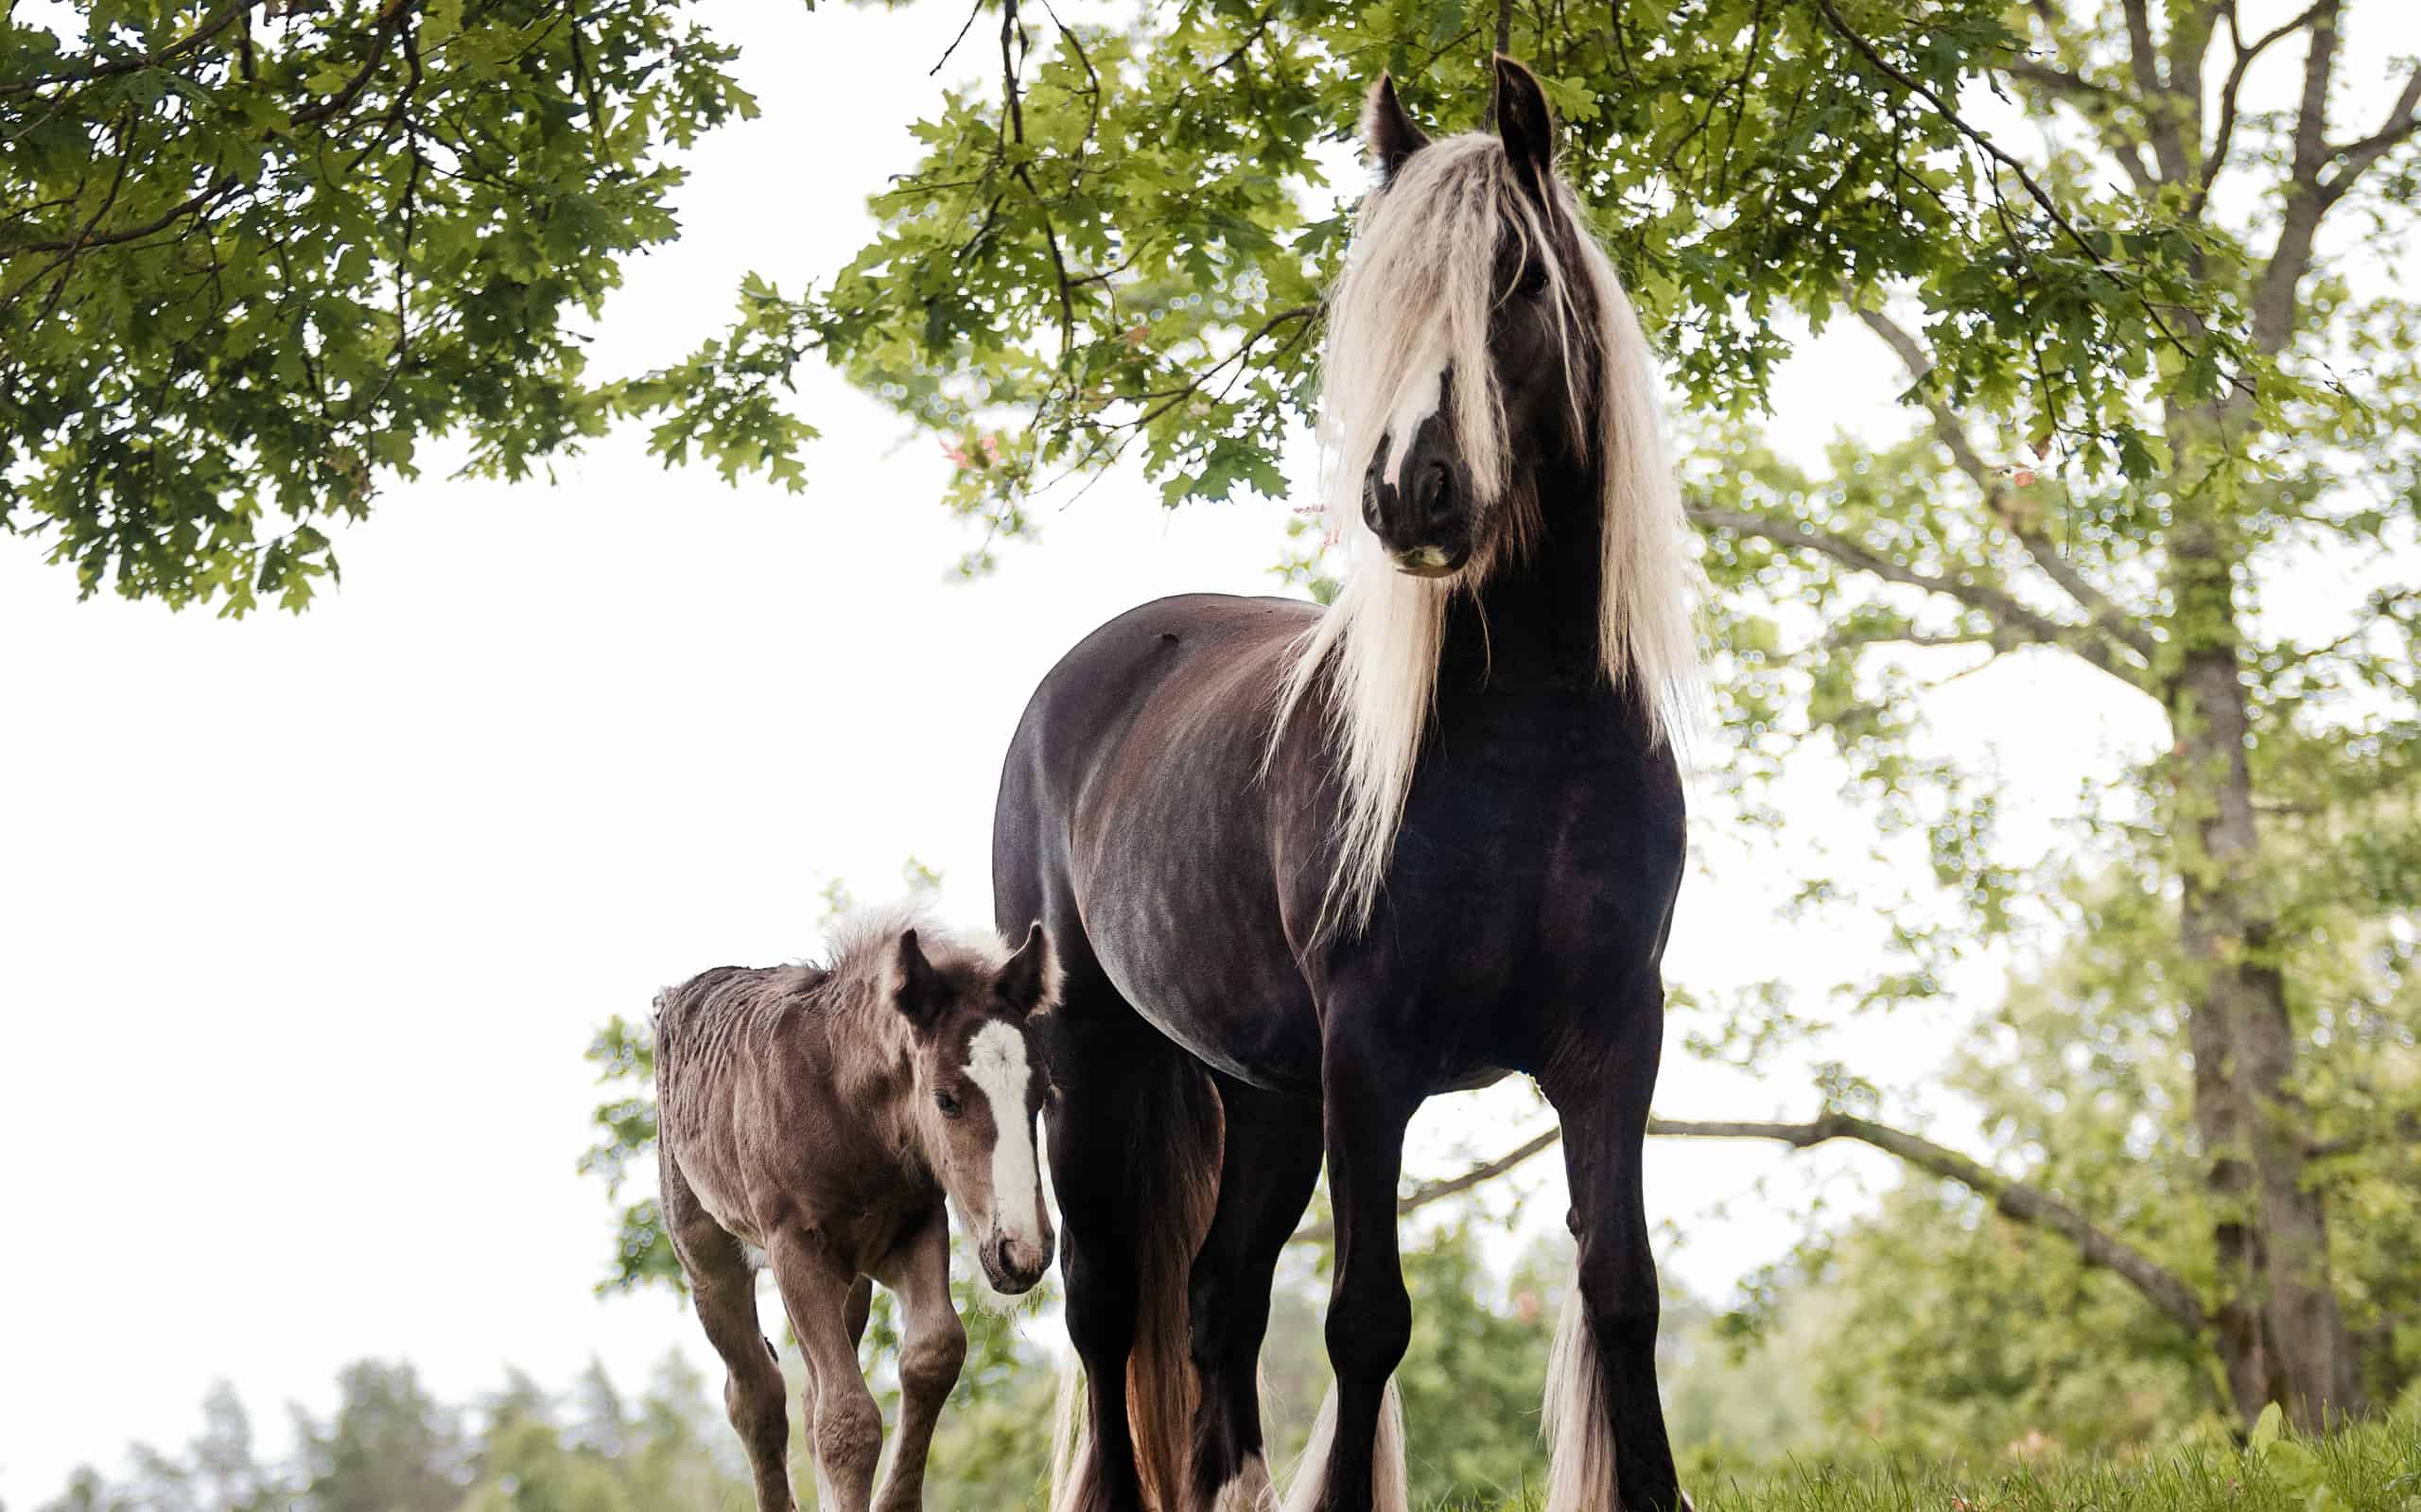 chocolate flaxen horse - Irish (gypsy) cob horse mare with extra long flaxen blond mane outside in the summer against green trees with a small foal nearby.